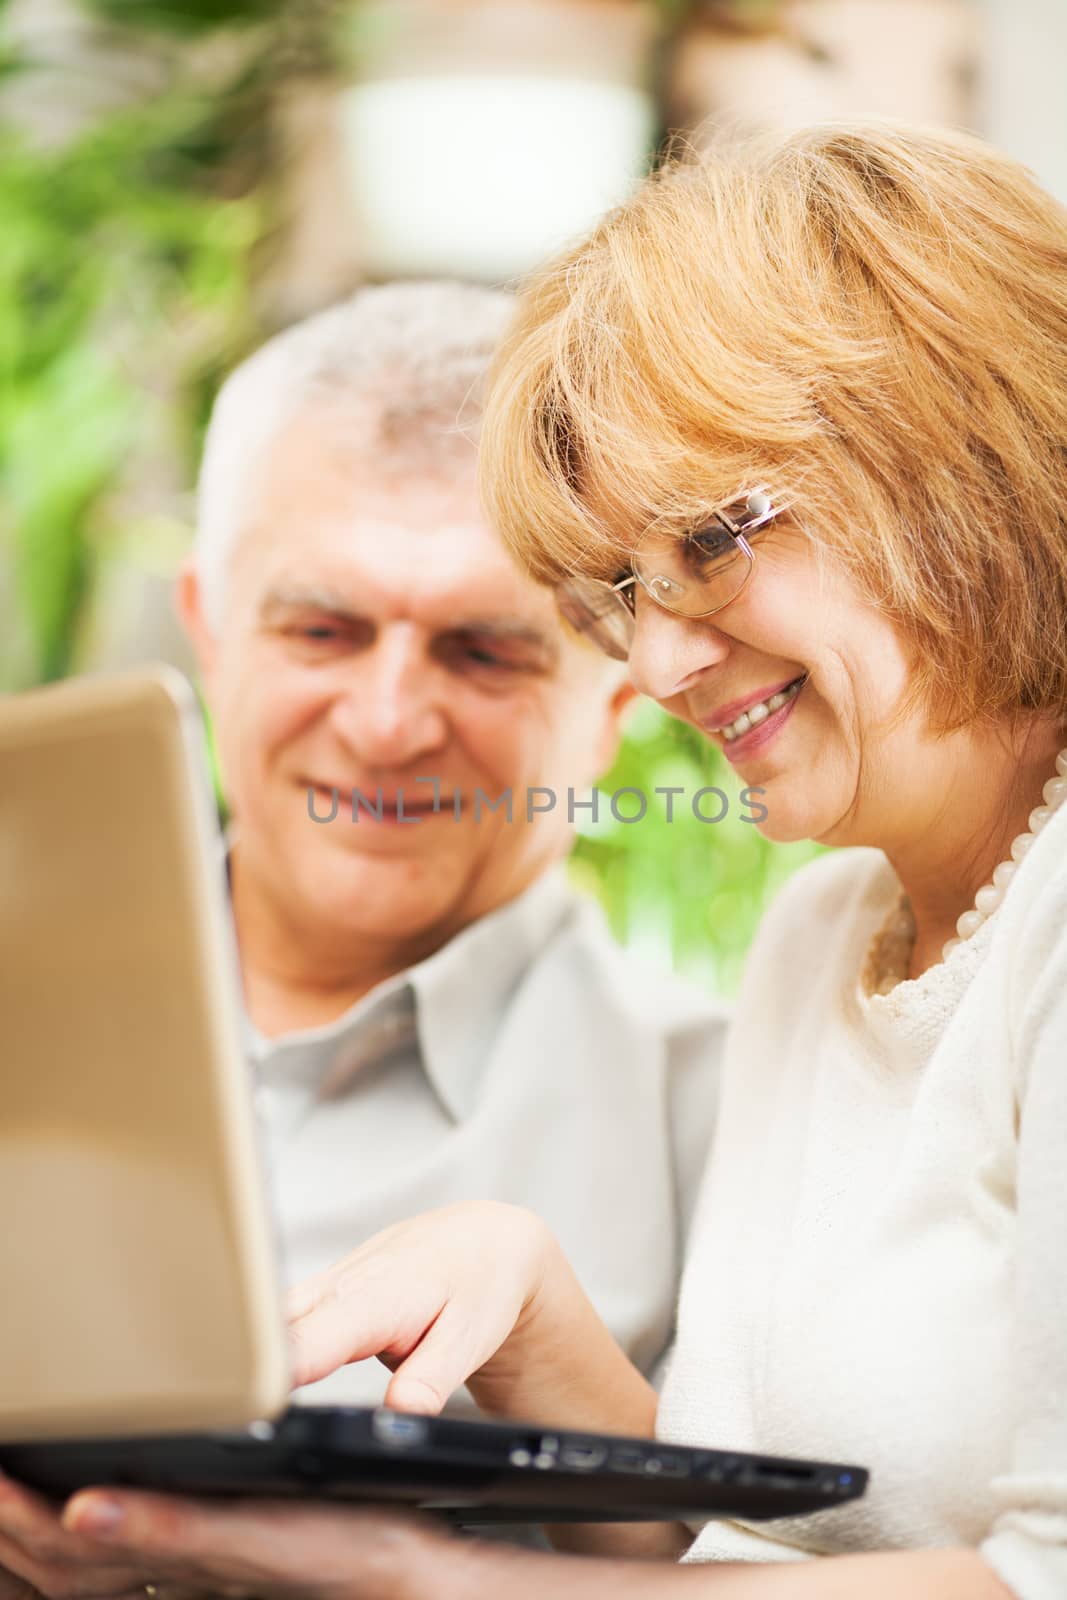 Happy senior couple using laptop at home